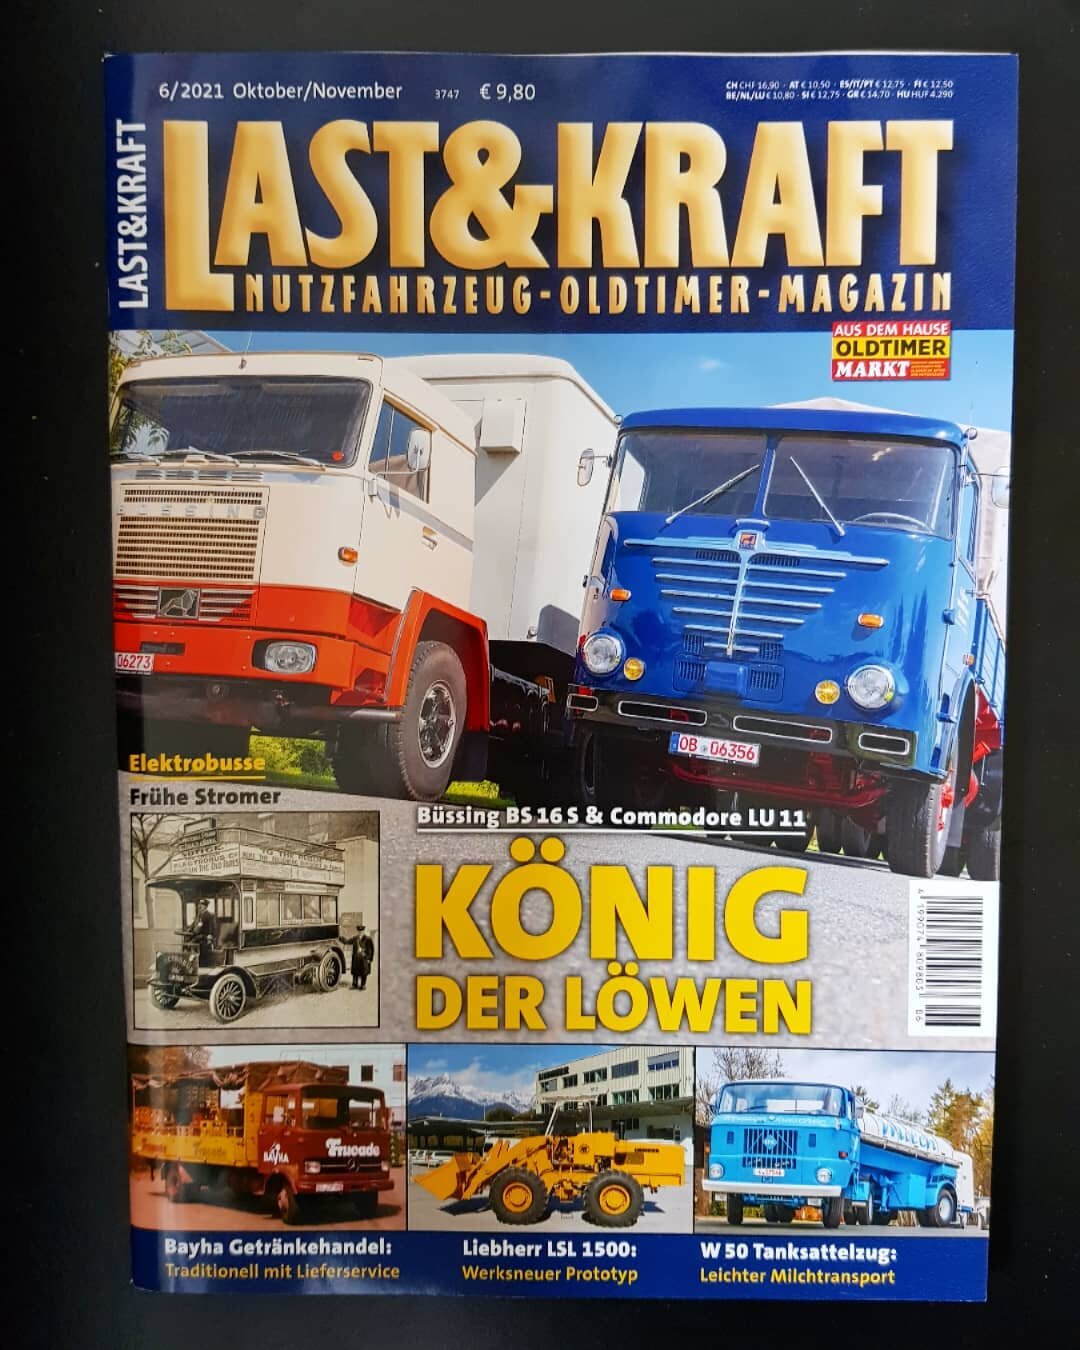 We produced the cover shoot for the magazine Last&amp;Kraft with 2 historic Buessing trucks... you can read the full story and see more photos of the beauties in the current Edition... thanks to the owner and to the magazine...

#lkwfotografie #lkwfa